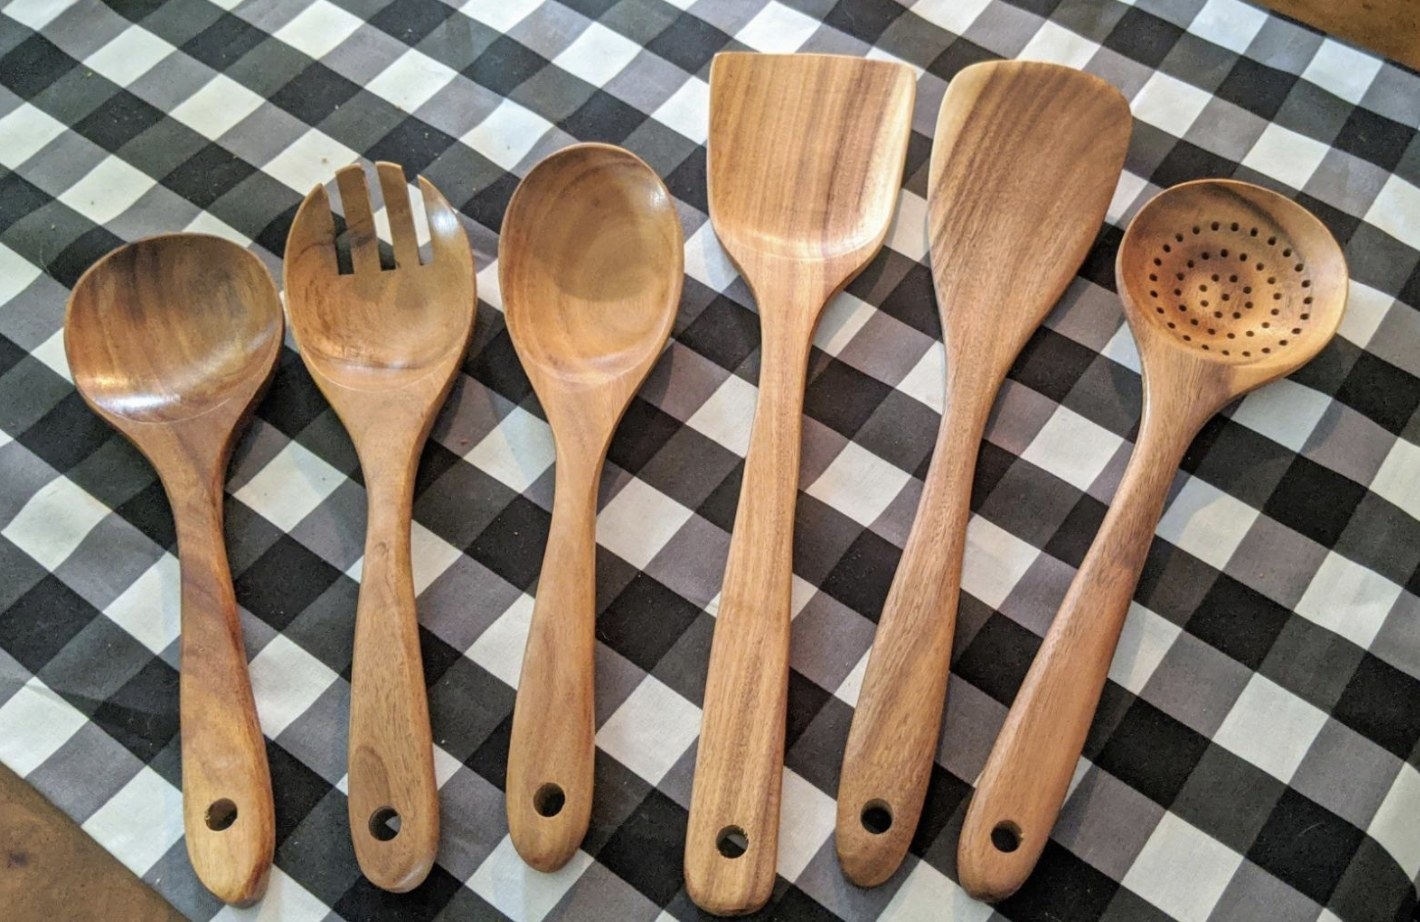 the full set of wooden kitchen utensils on a table